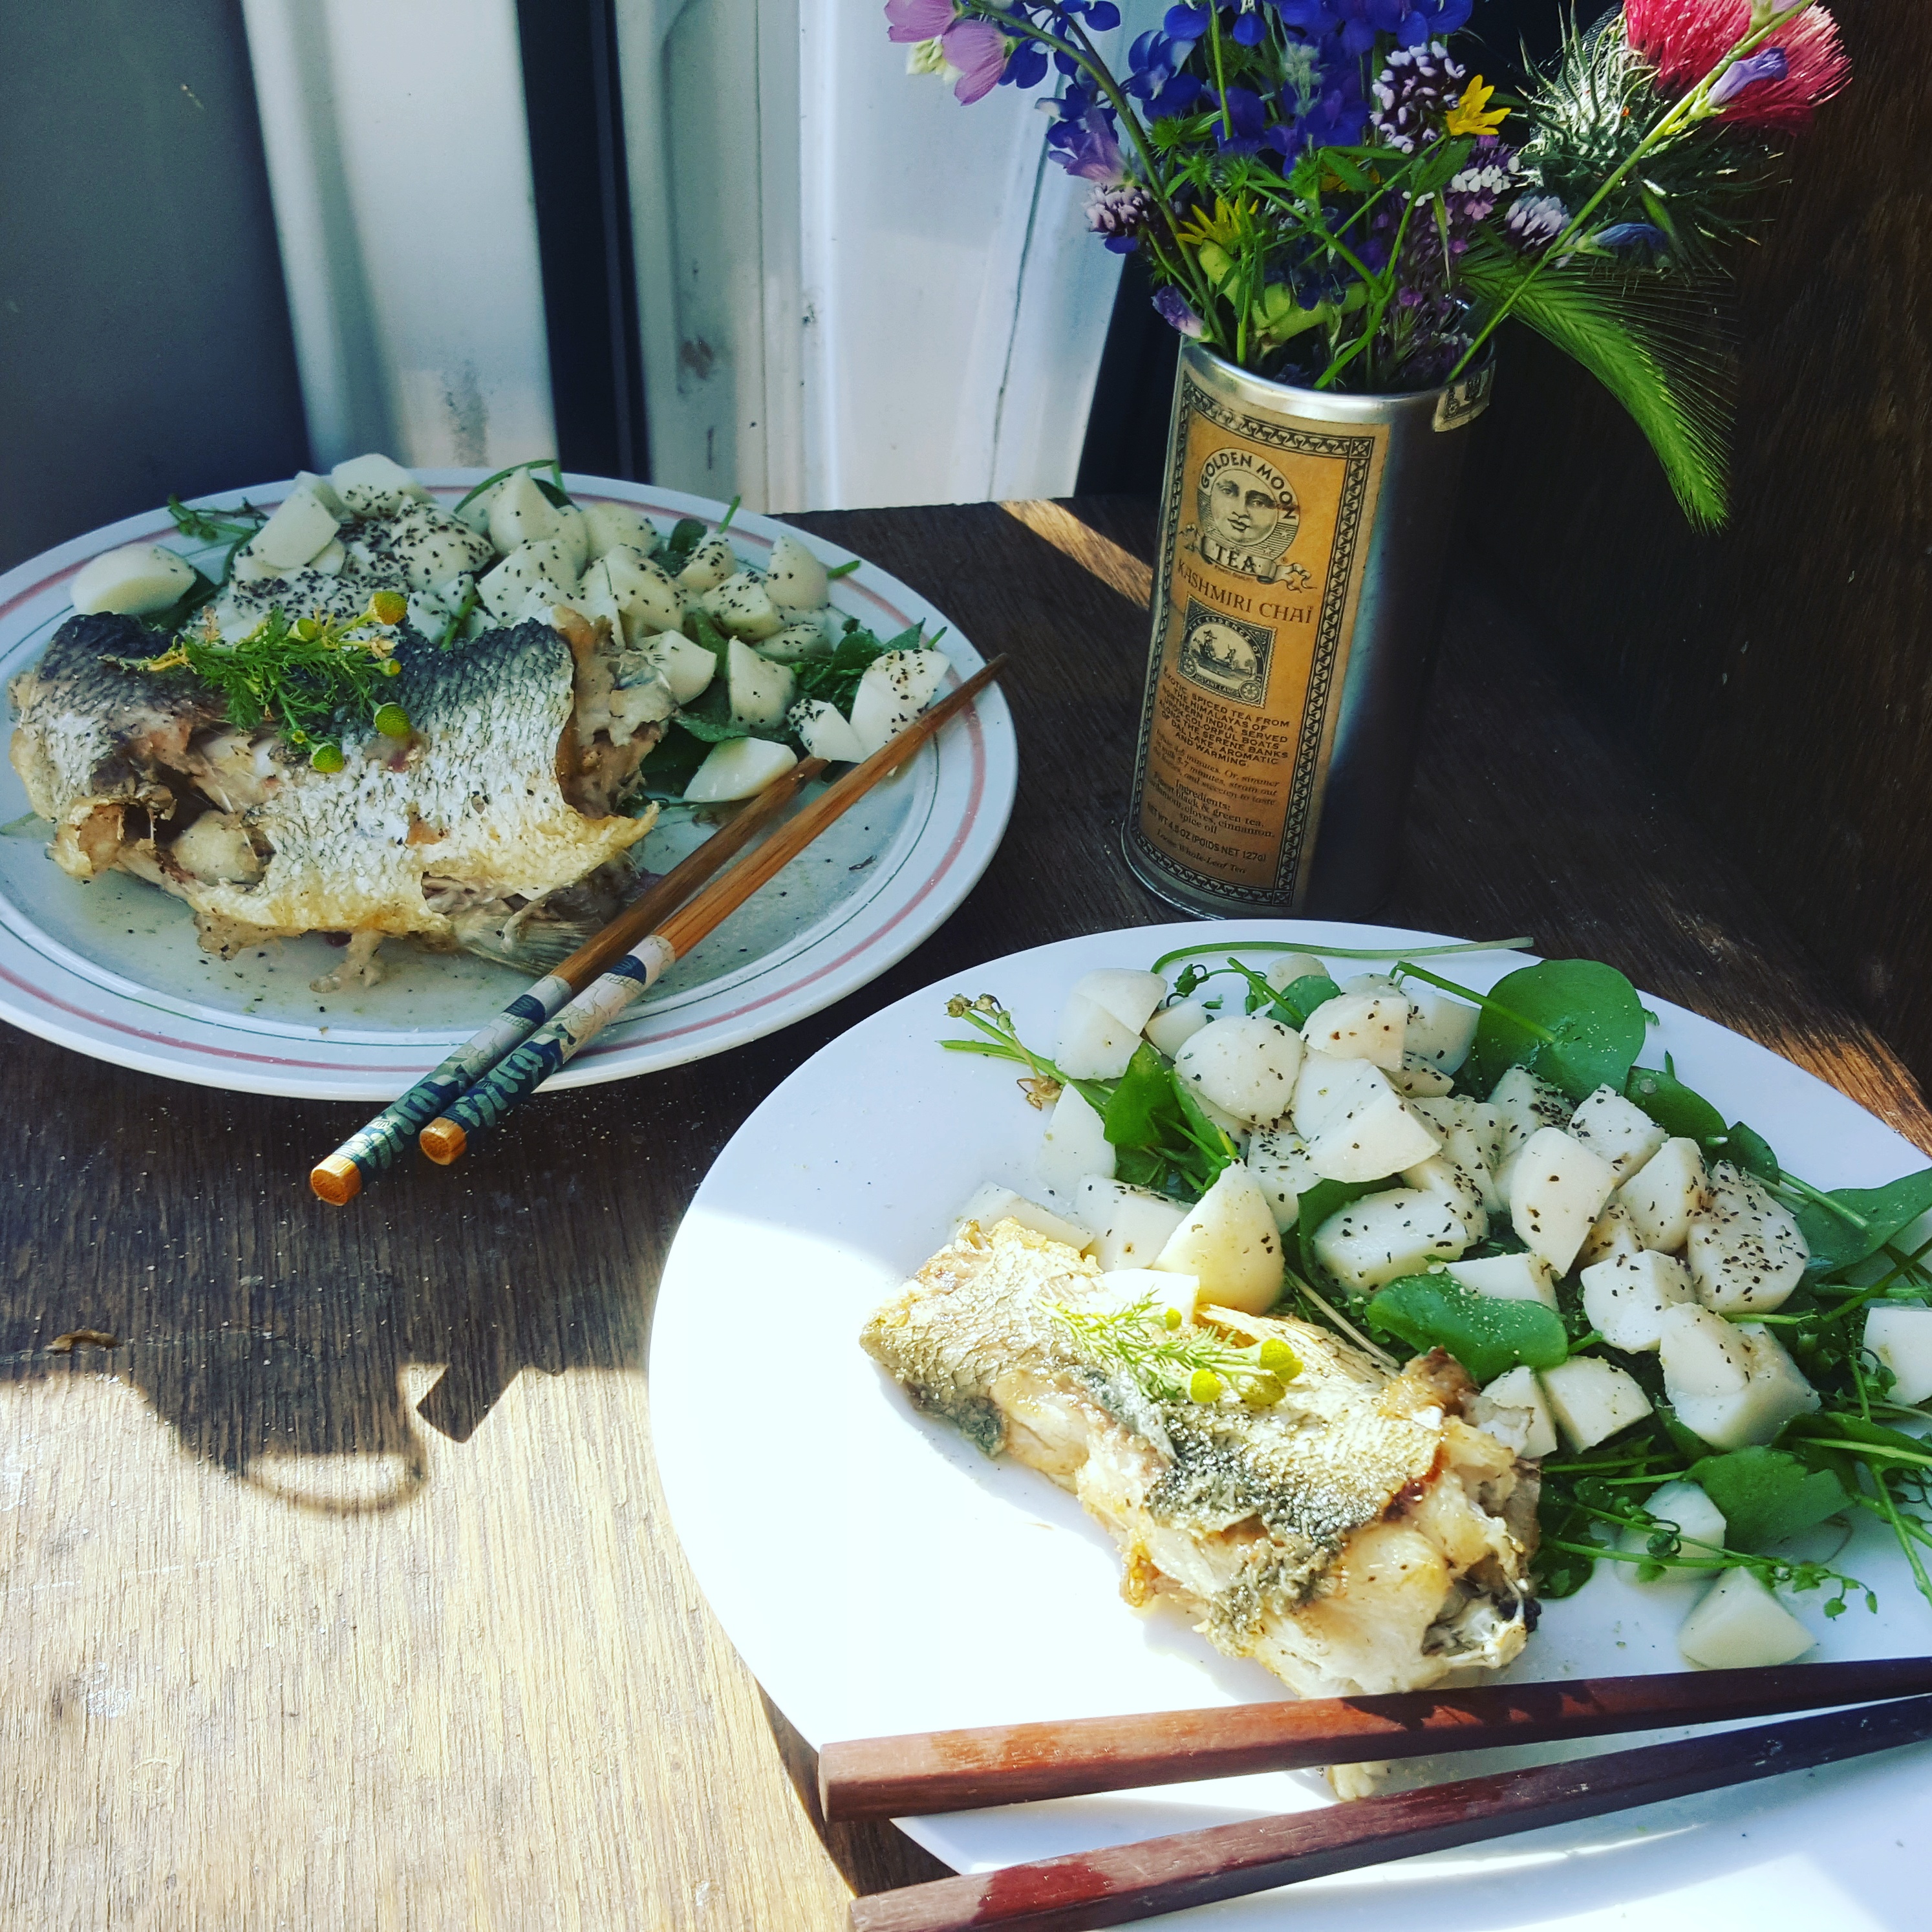 Rainbow Trout and miners lettuce salad